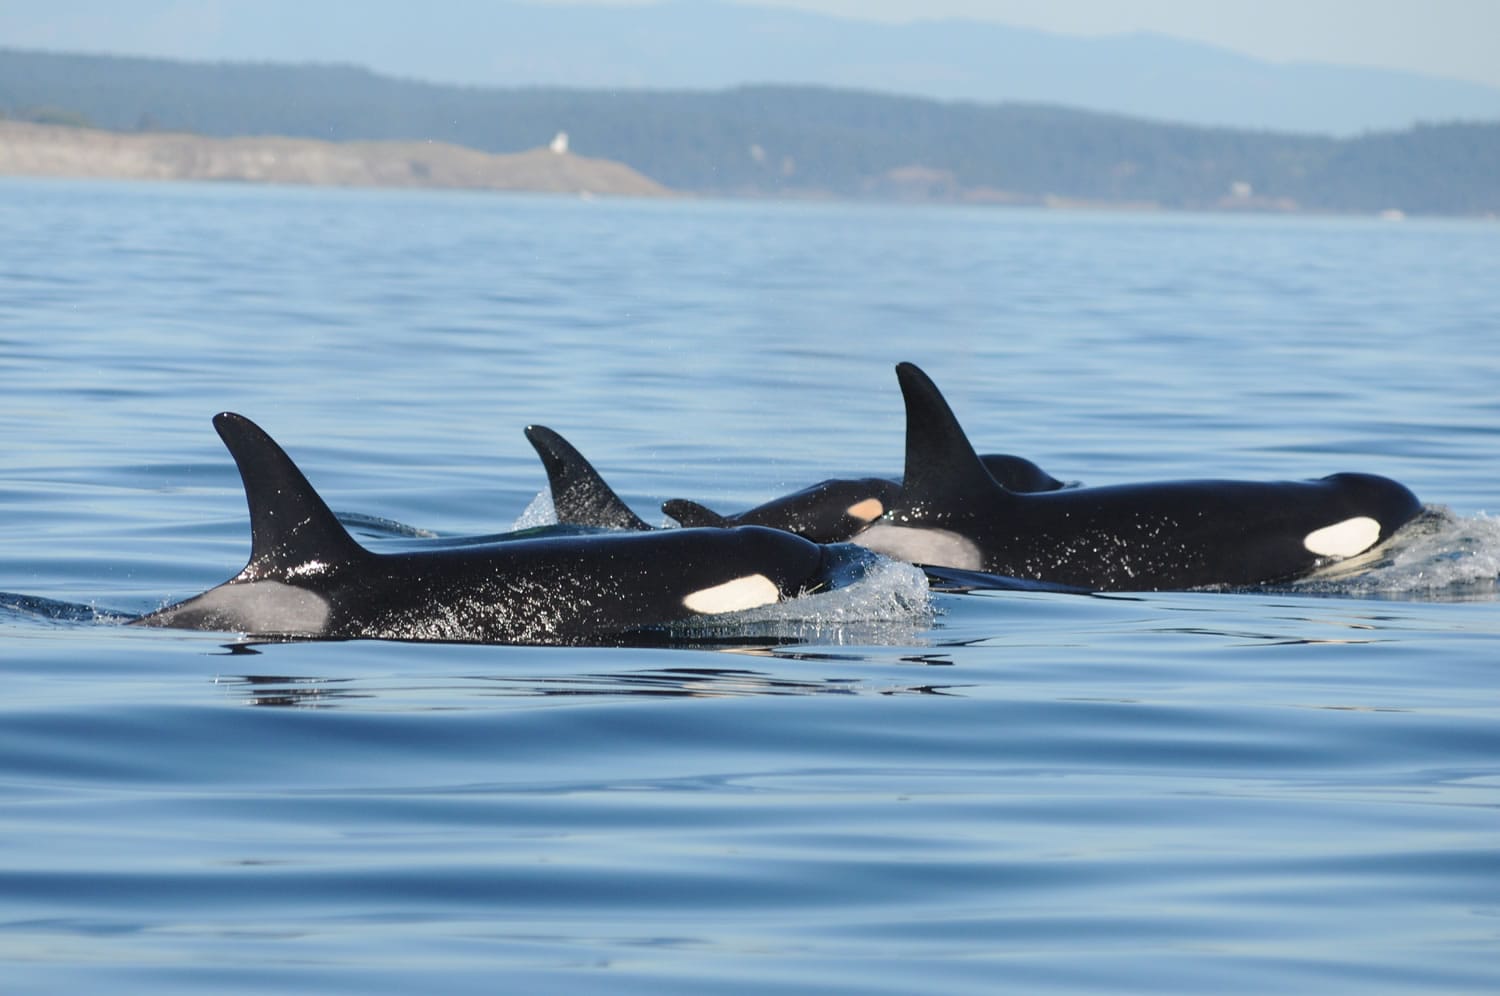 A baby orca swims with two adults Saturday in the waters of Puget Sound near Seattle, Wash. The baby orca is the population's first calf born since 2012.